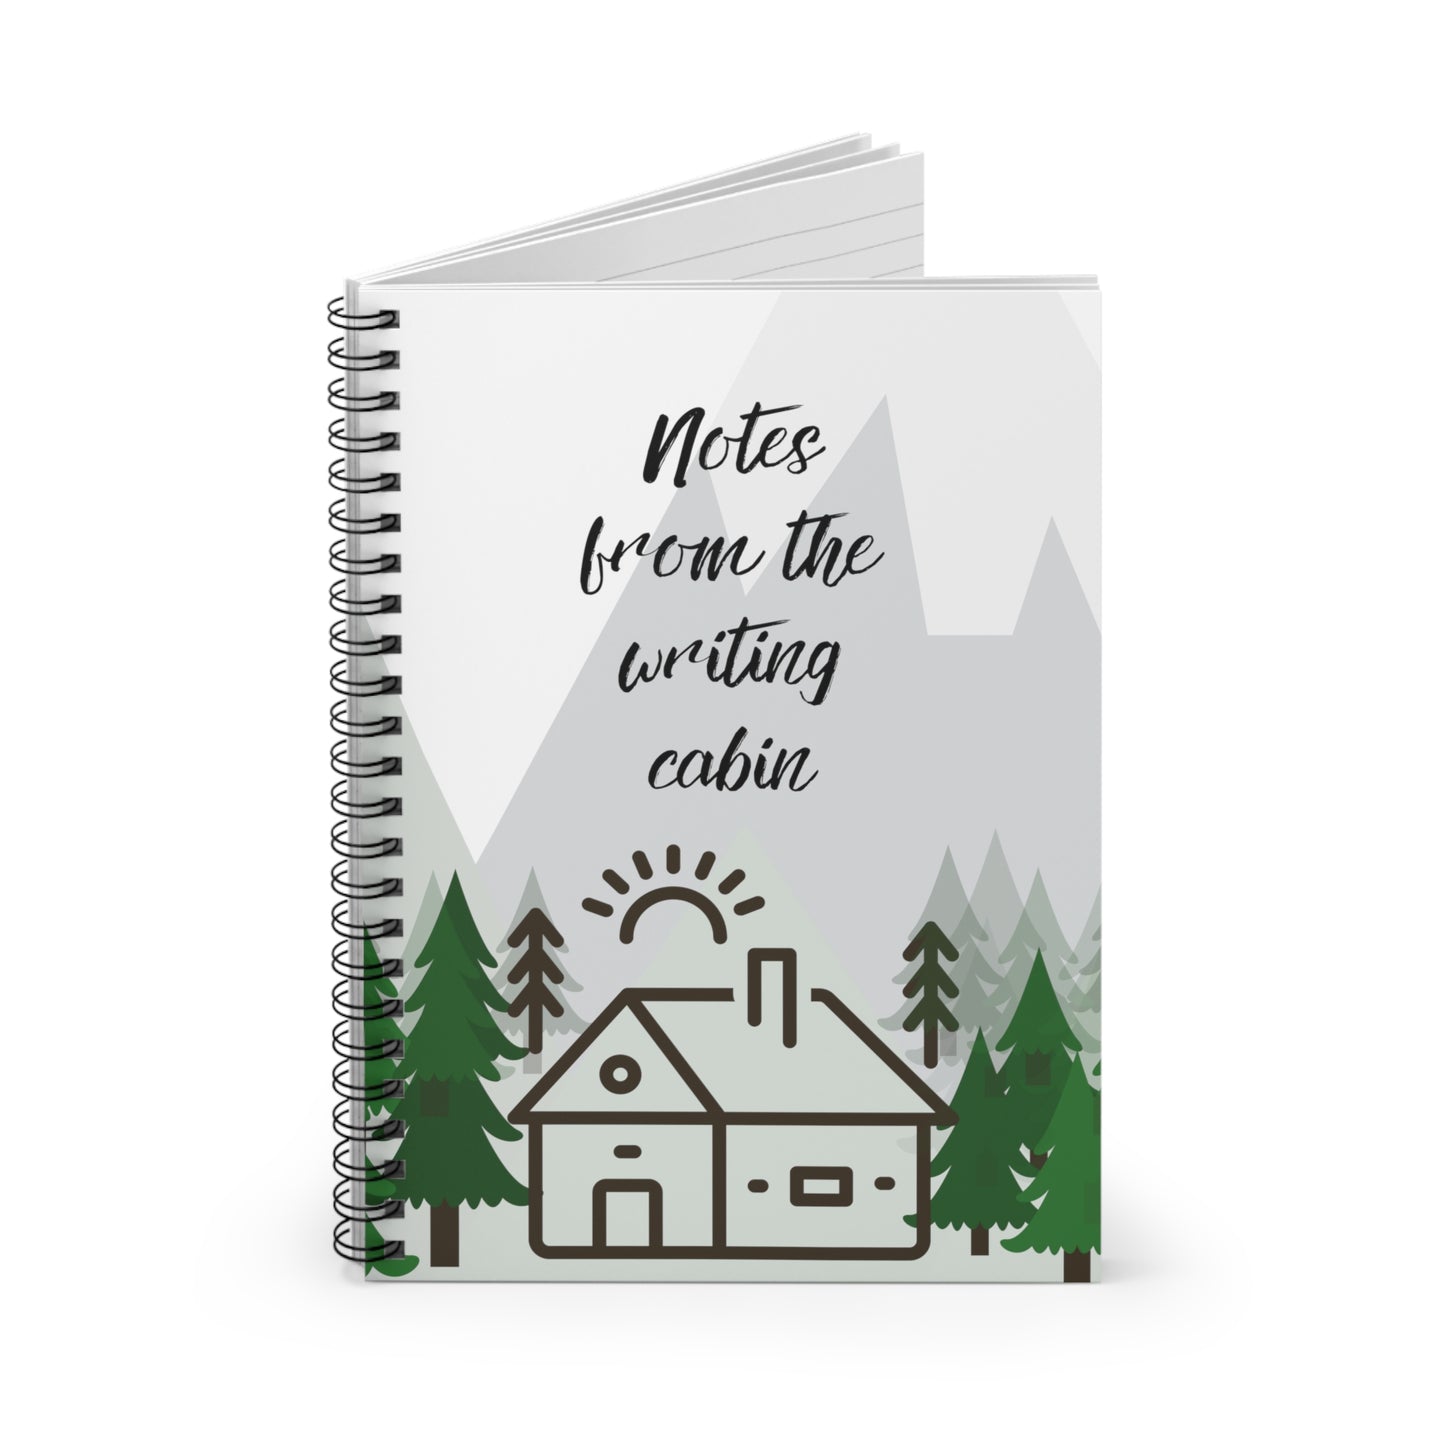 Notes from the Writing Cabin - Writers Notebook Journal